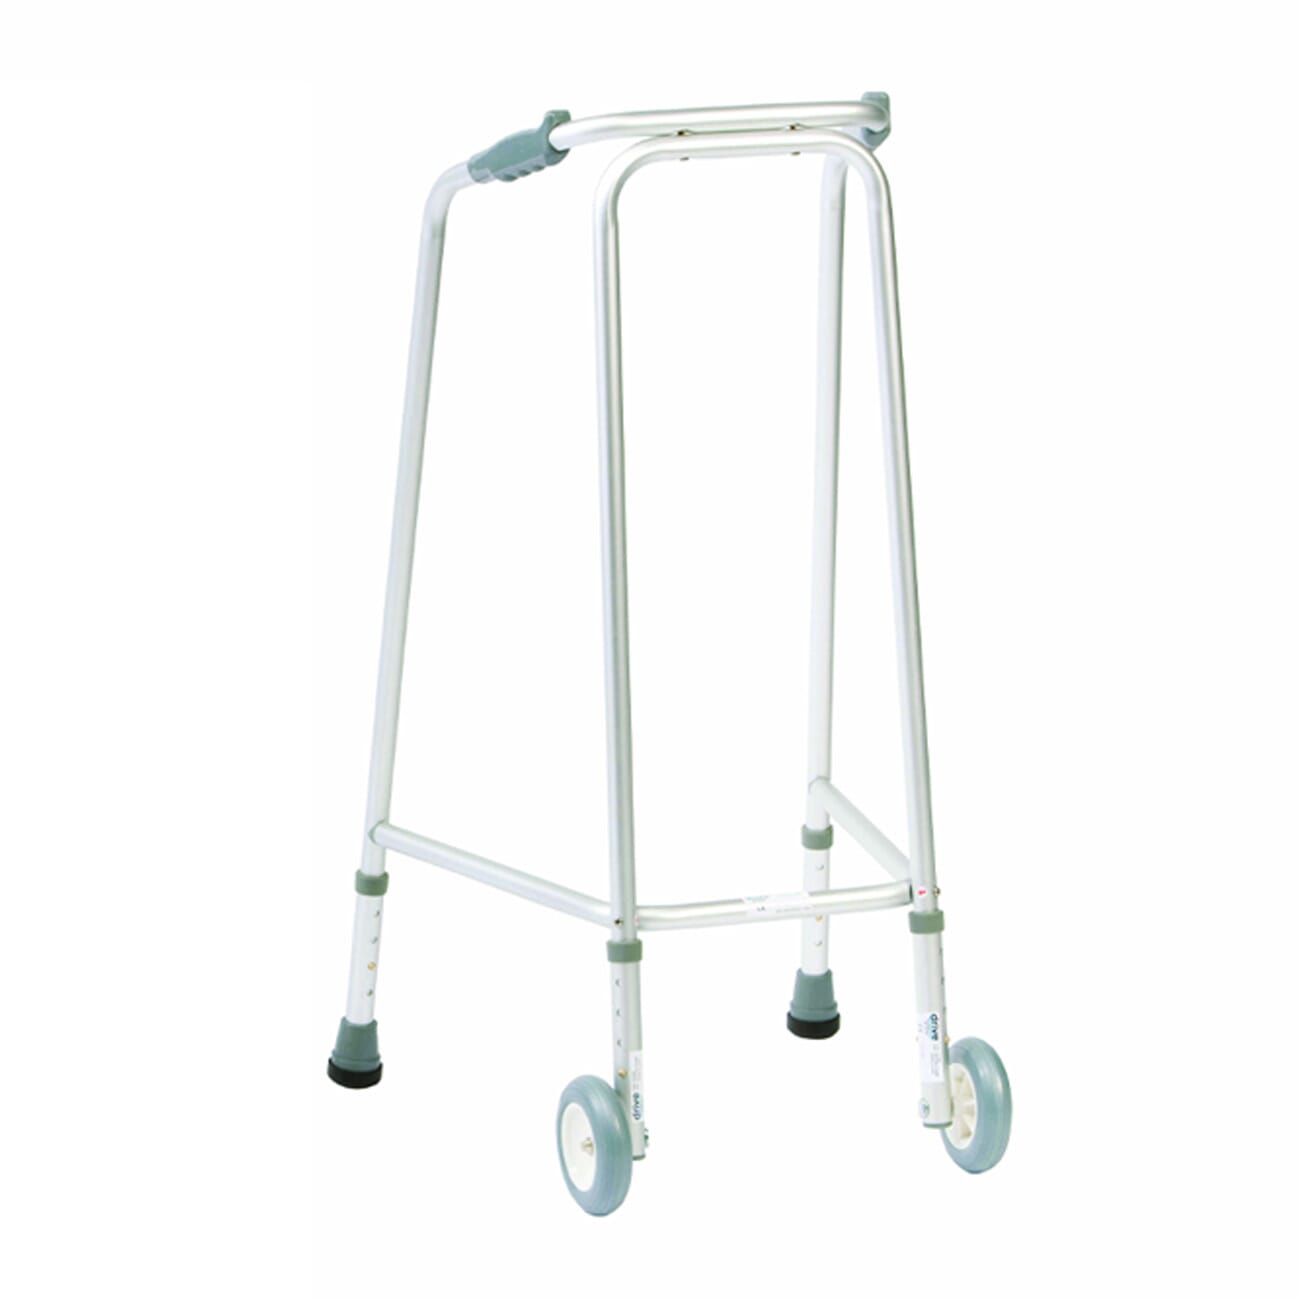 View Lightweight Zimmer Frame Walking Frames Large Domestic with Wheels information